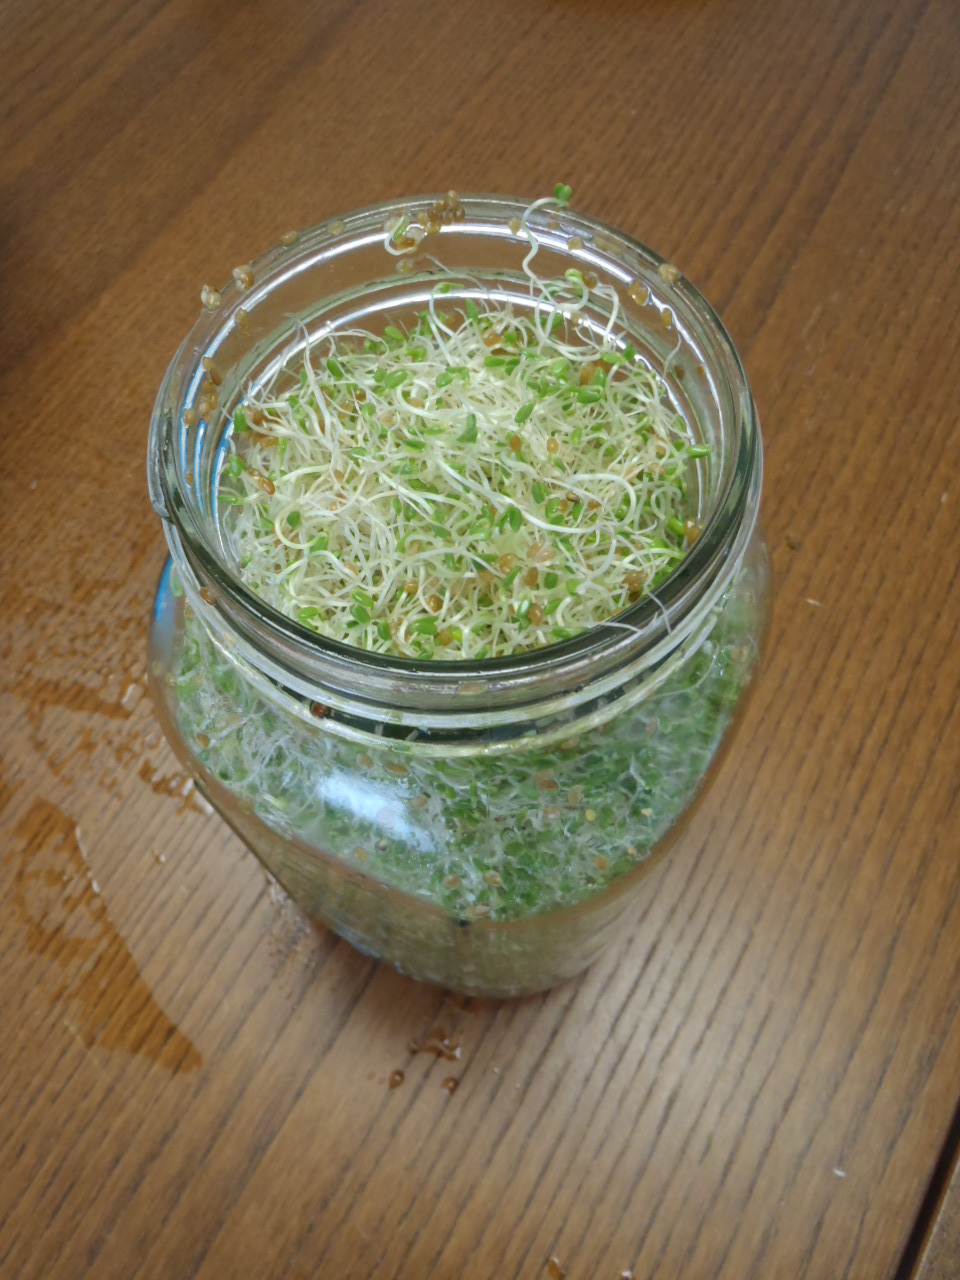 Jar o' clover sprouts